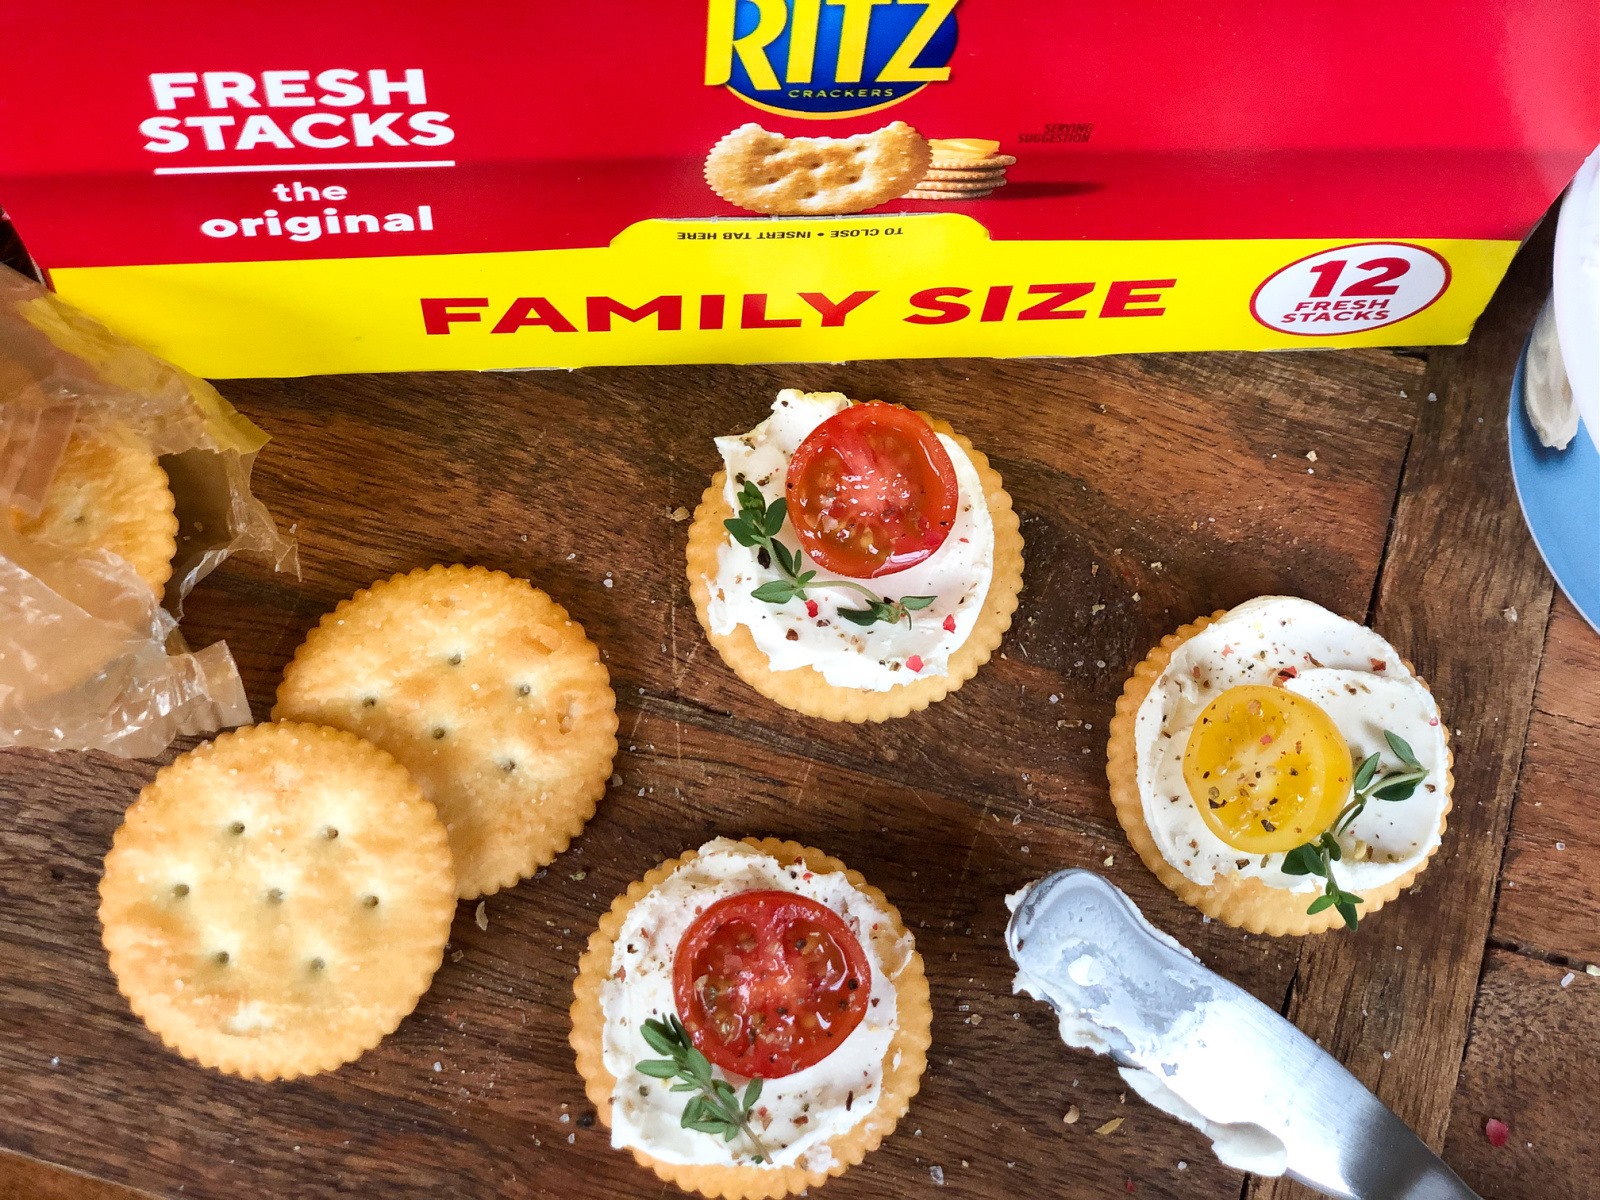 Nabisco Family Size Crackers Are Just $2.27 Per Box At Publix